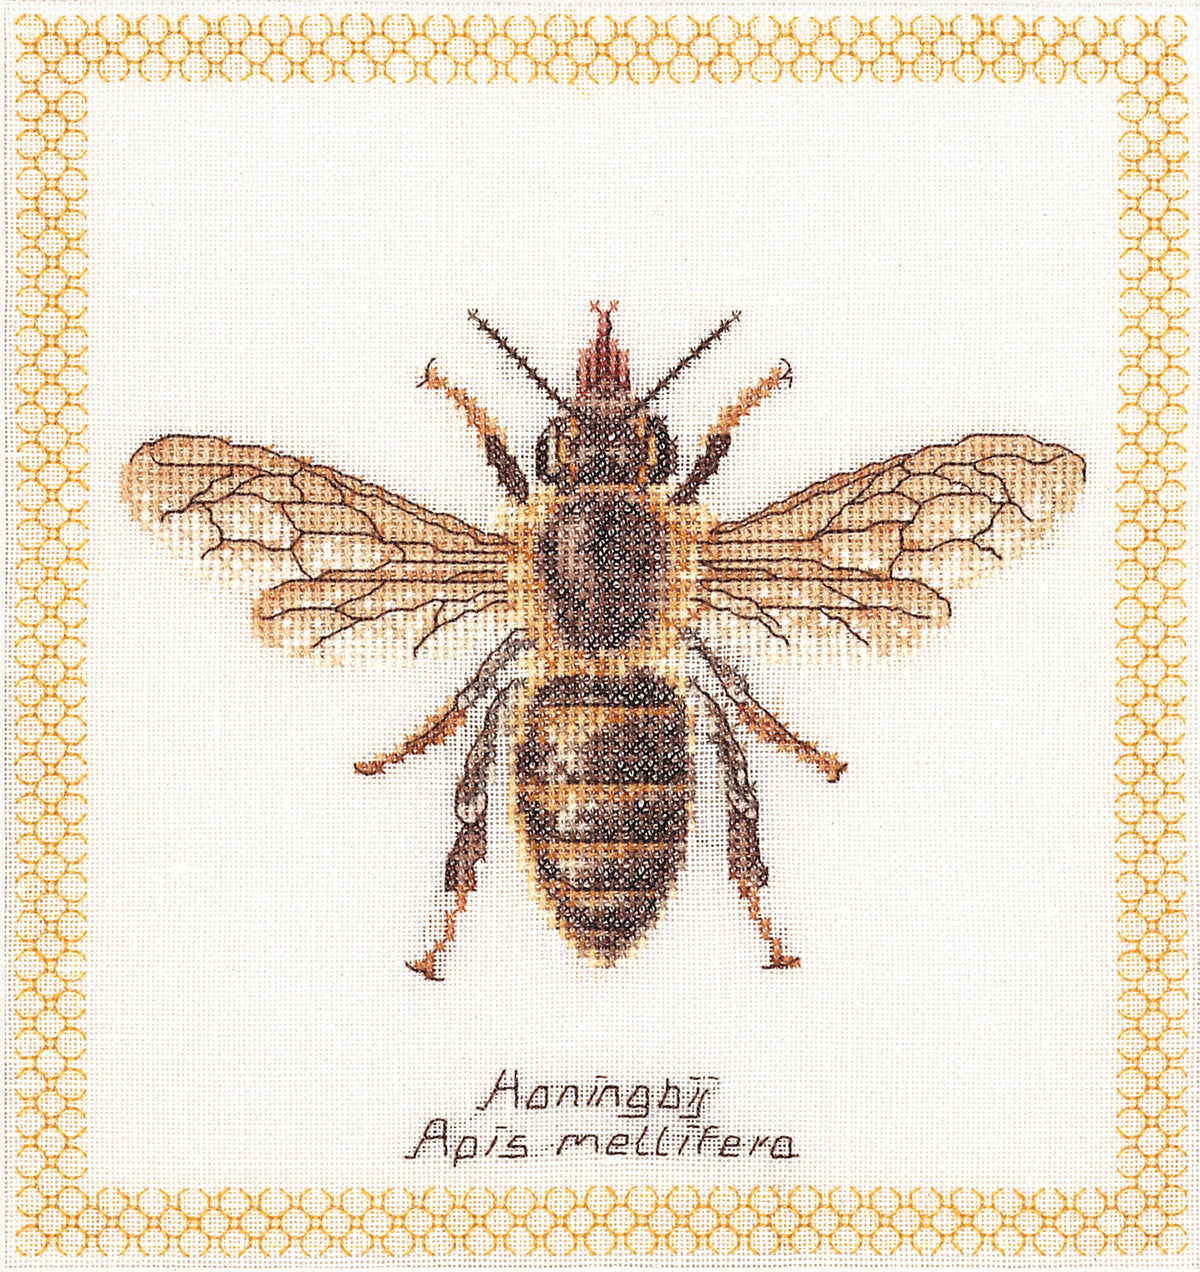 Thea Gouverneur - Counted Cross Stitch Kit - Honey Bee - Aida - 16 count - 3017A - Thea Gouverneur Since 1959